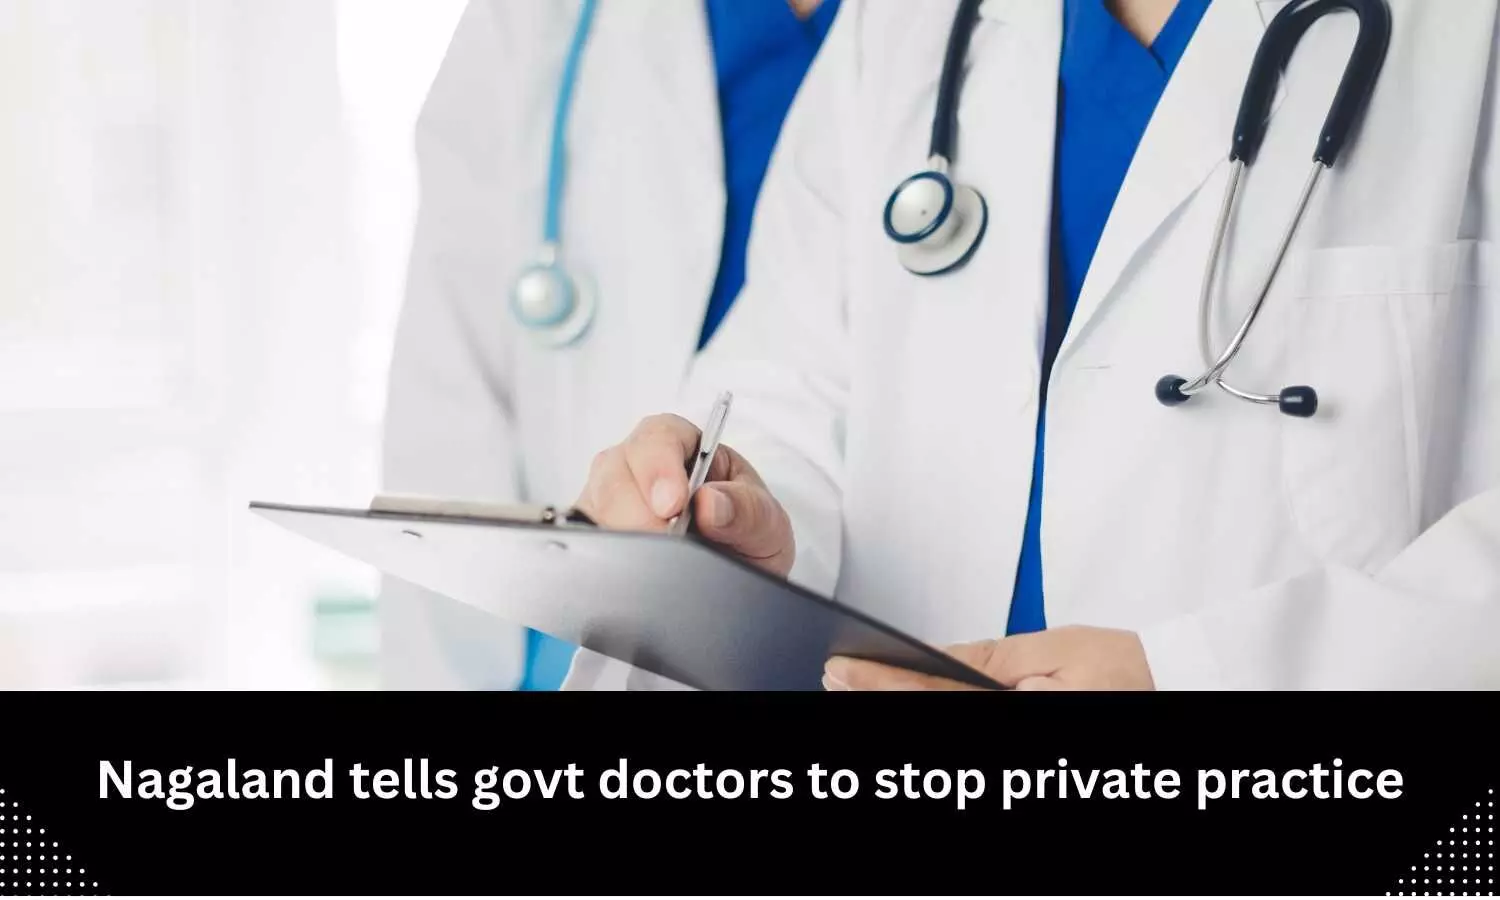 Stop private practice within one month: Nagaland directs Govt doctors